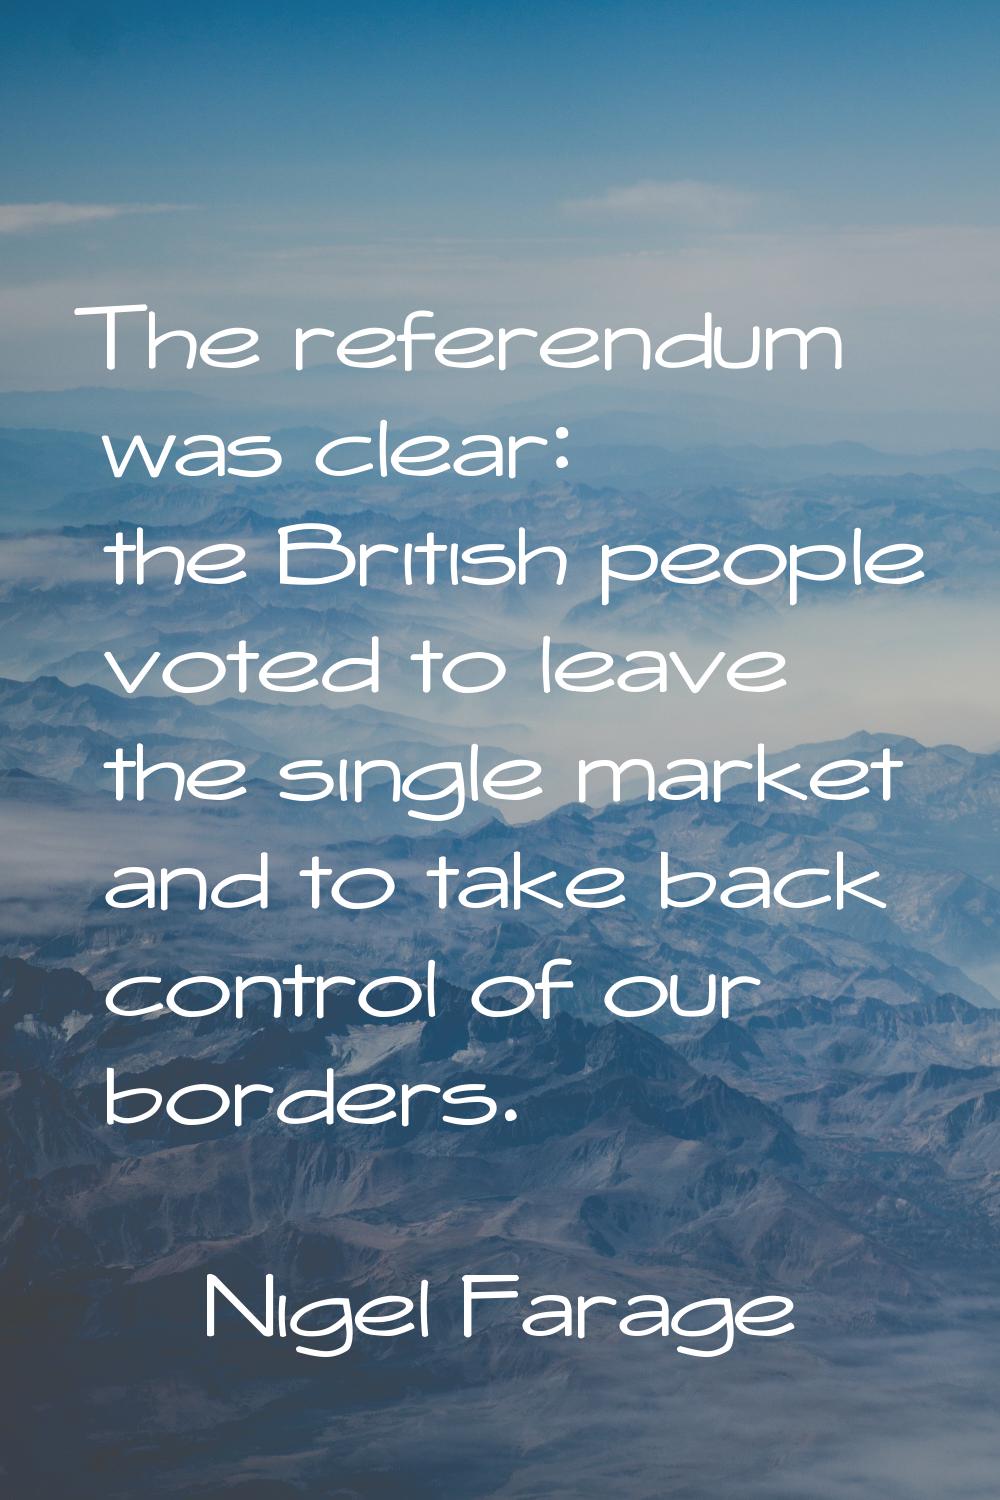 The referendum was clear: the British people voted to leave the single market and to take back cont